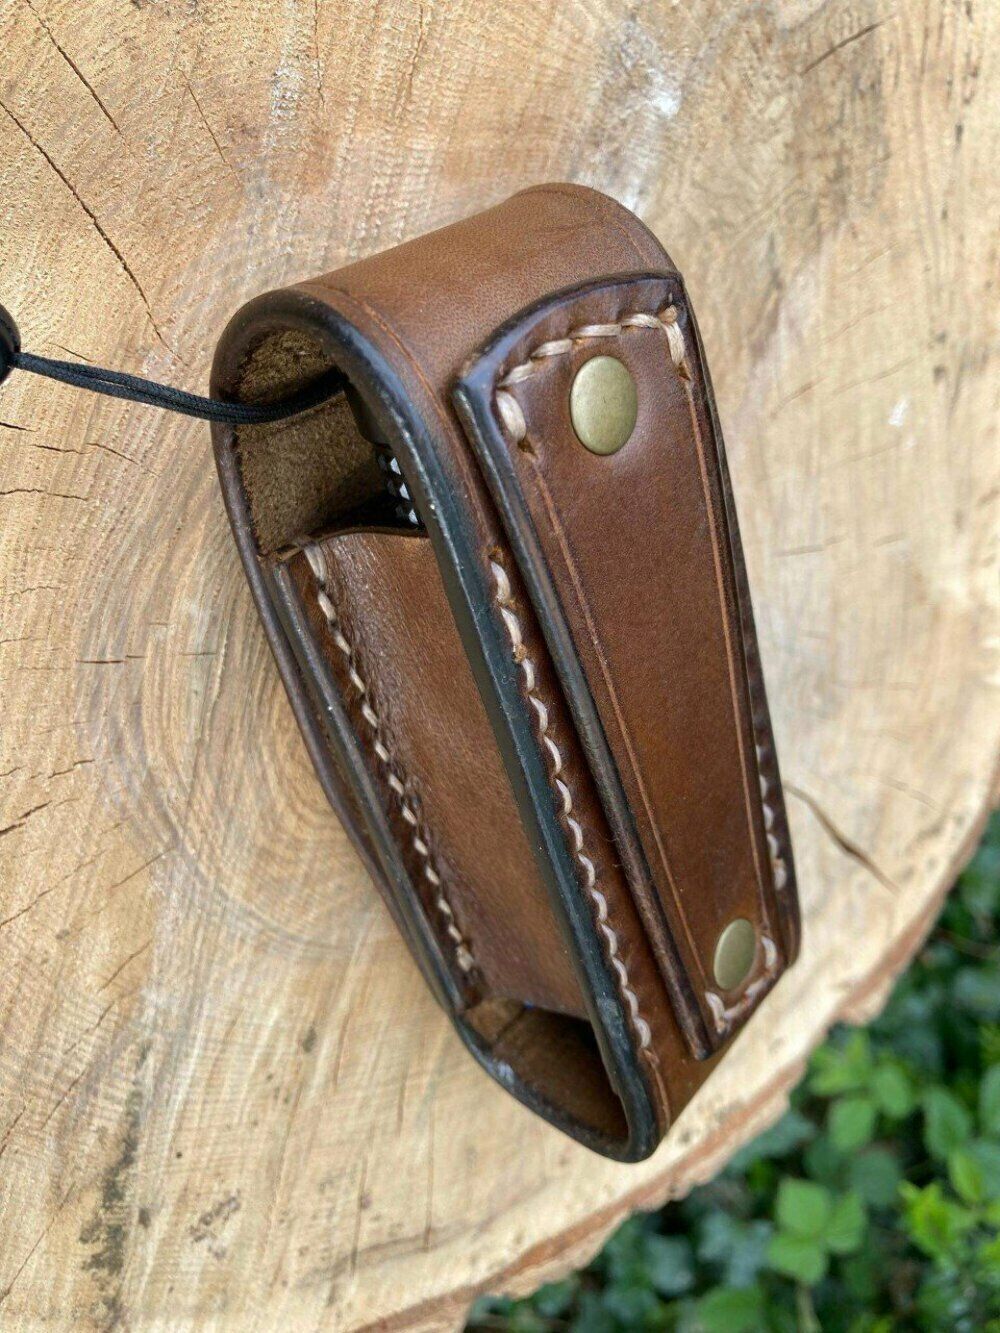 Leather torch pouch - Loop and stud closure for Olight S2E Baton II.